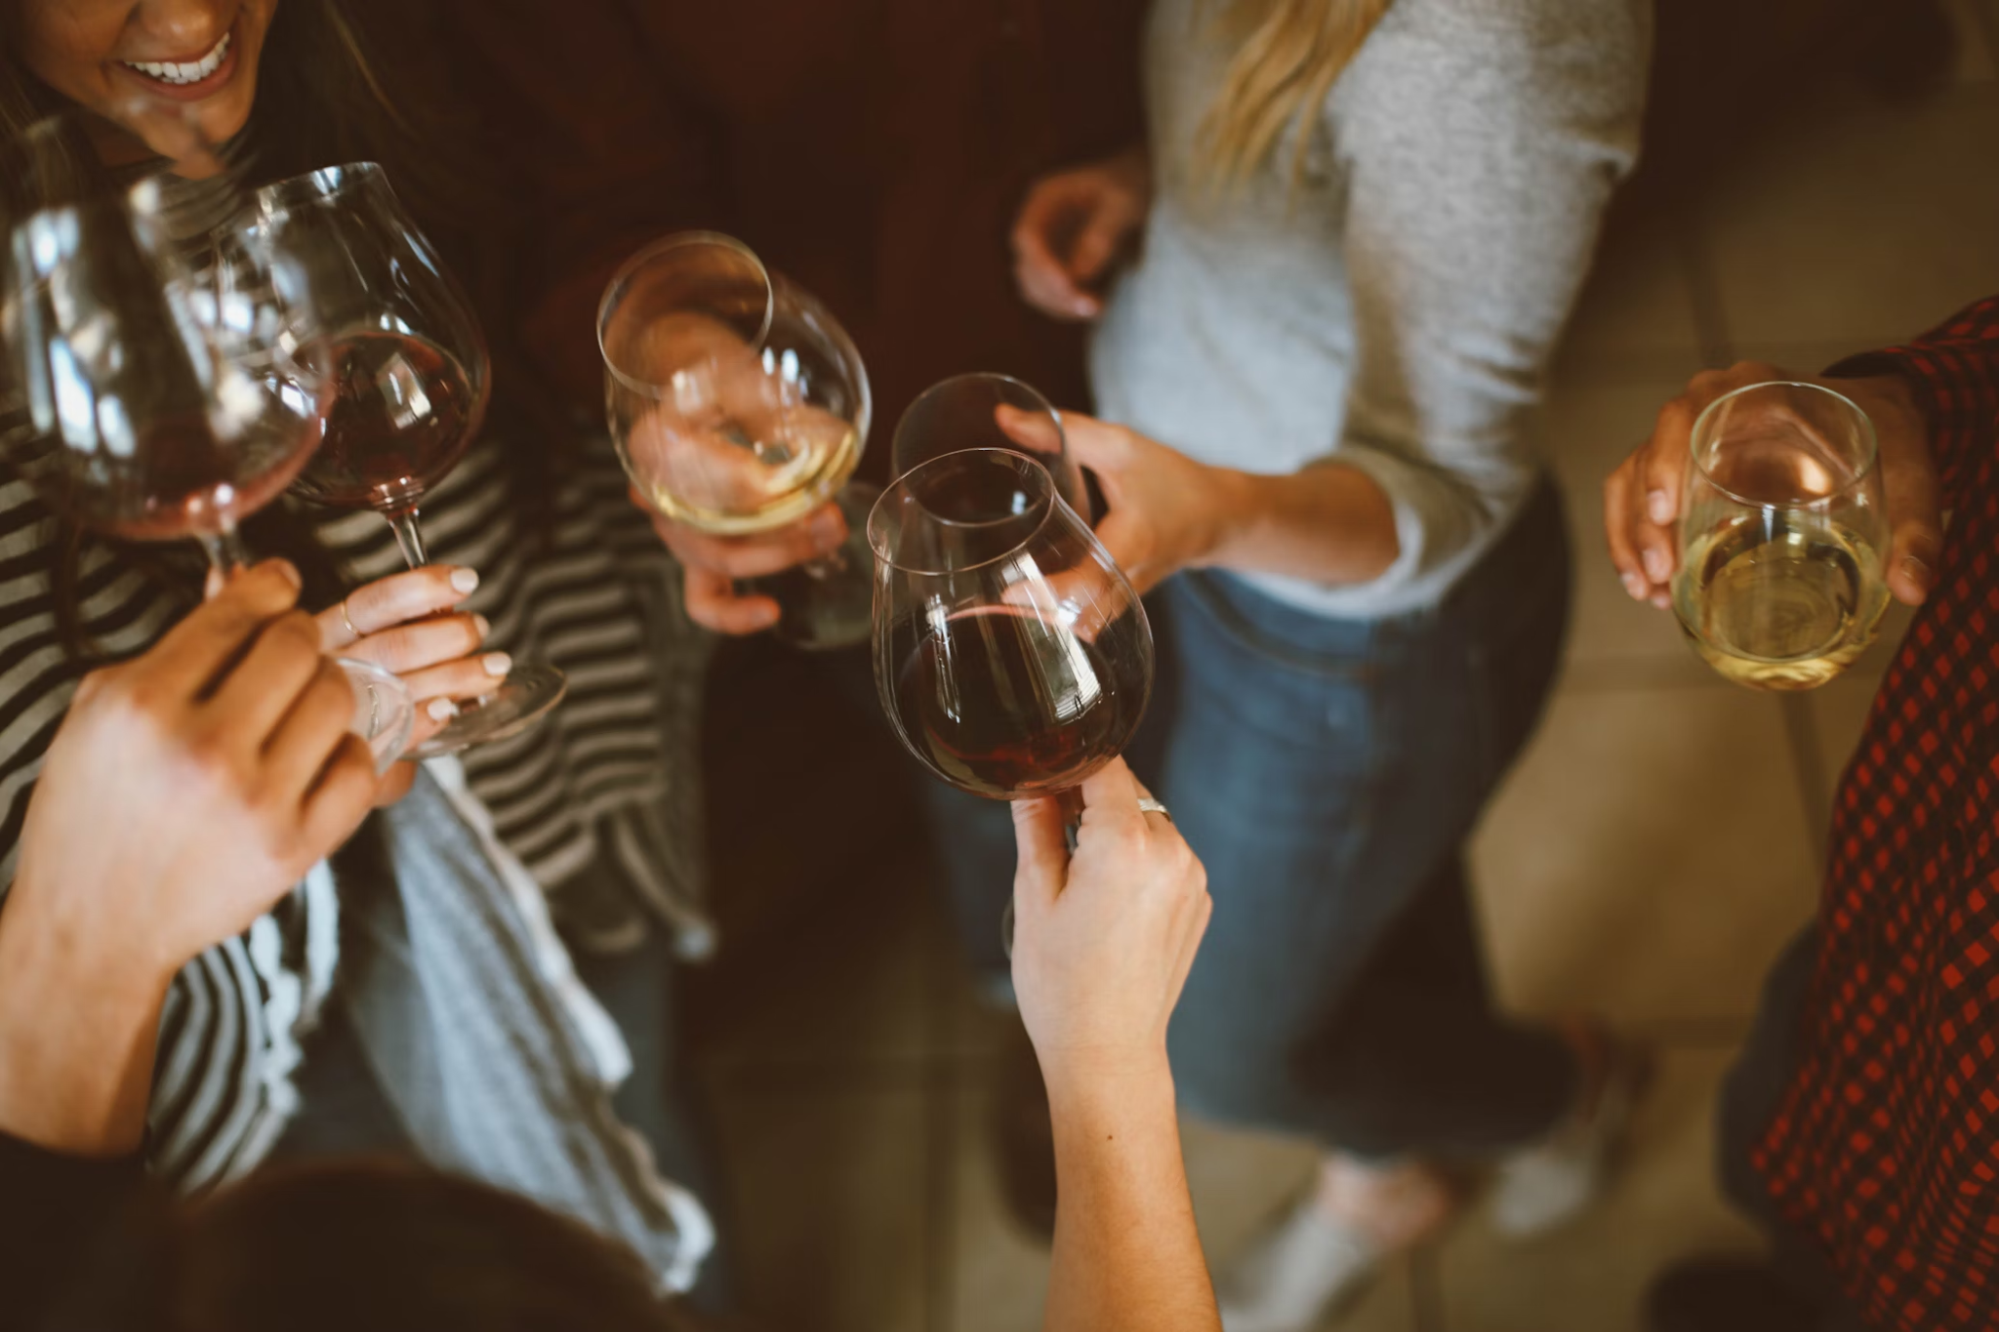 How to Organize an Afterwork Wine Tasting